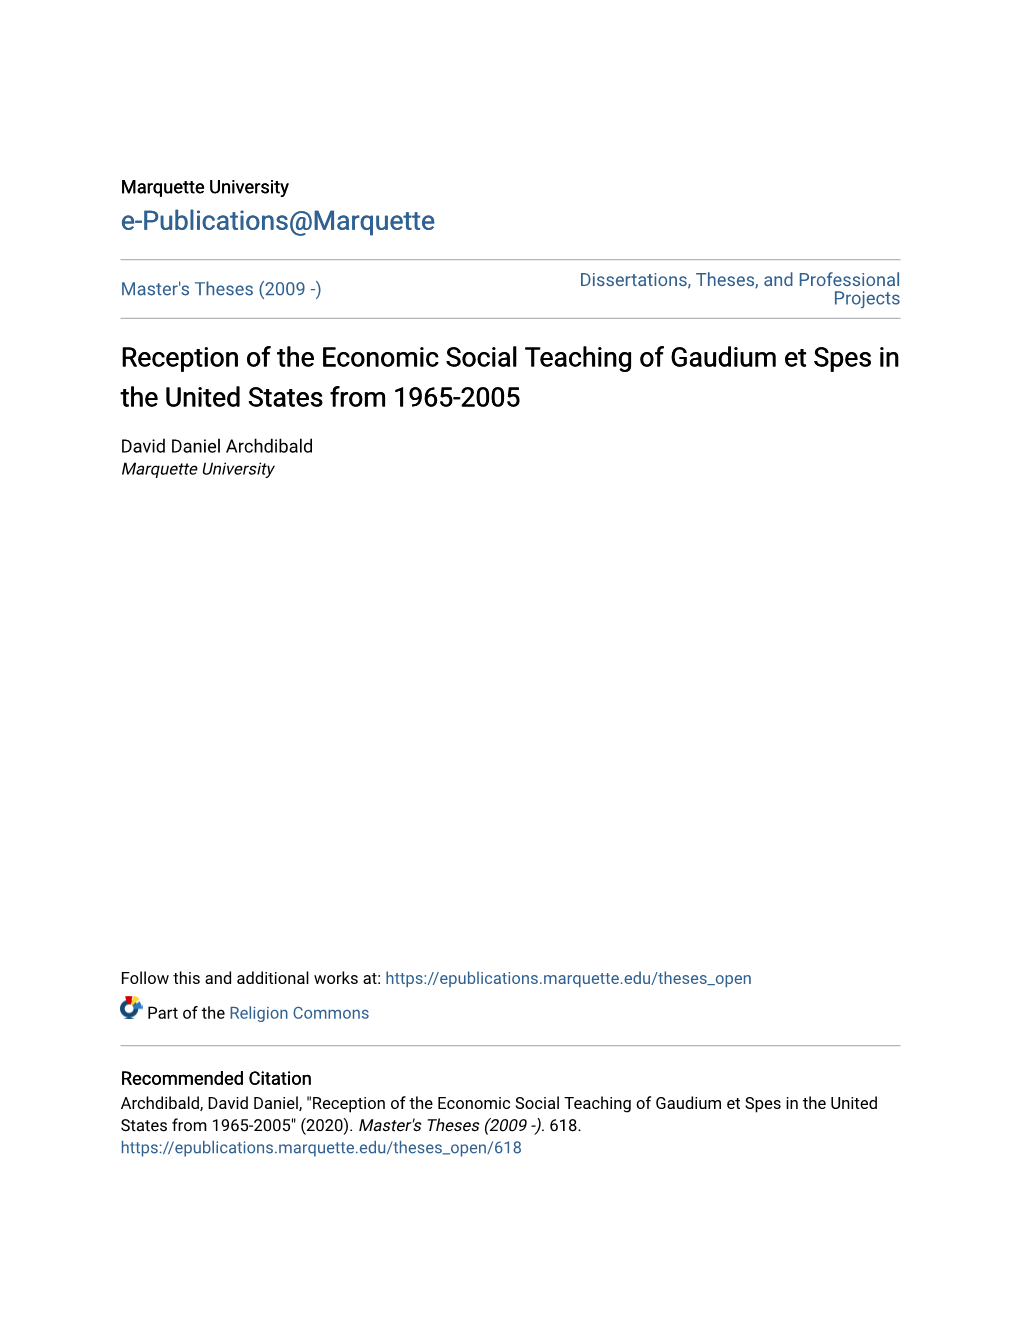 Reception of the Economic Social Teaching of Gaudium Et Spes in the United States from 1965-2005